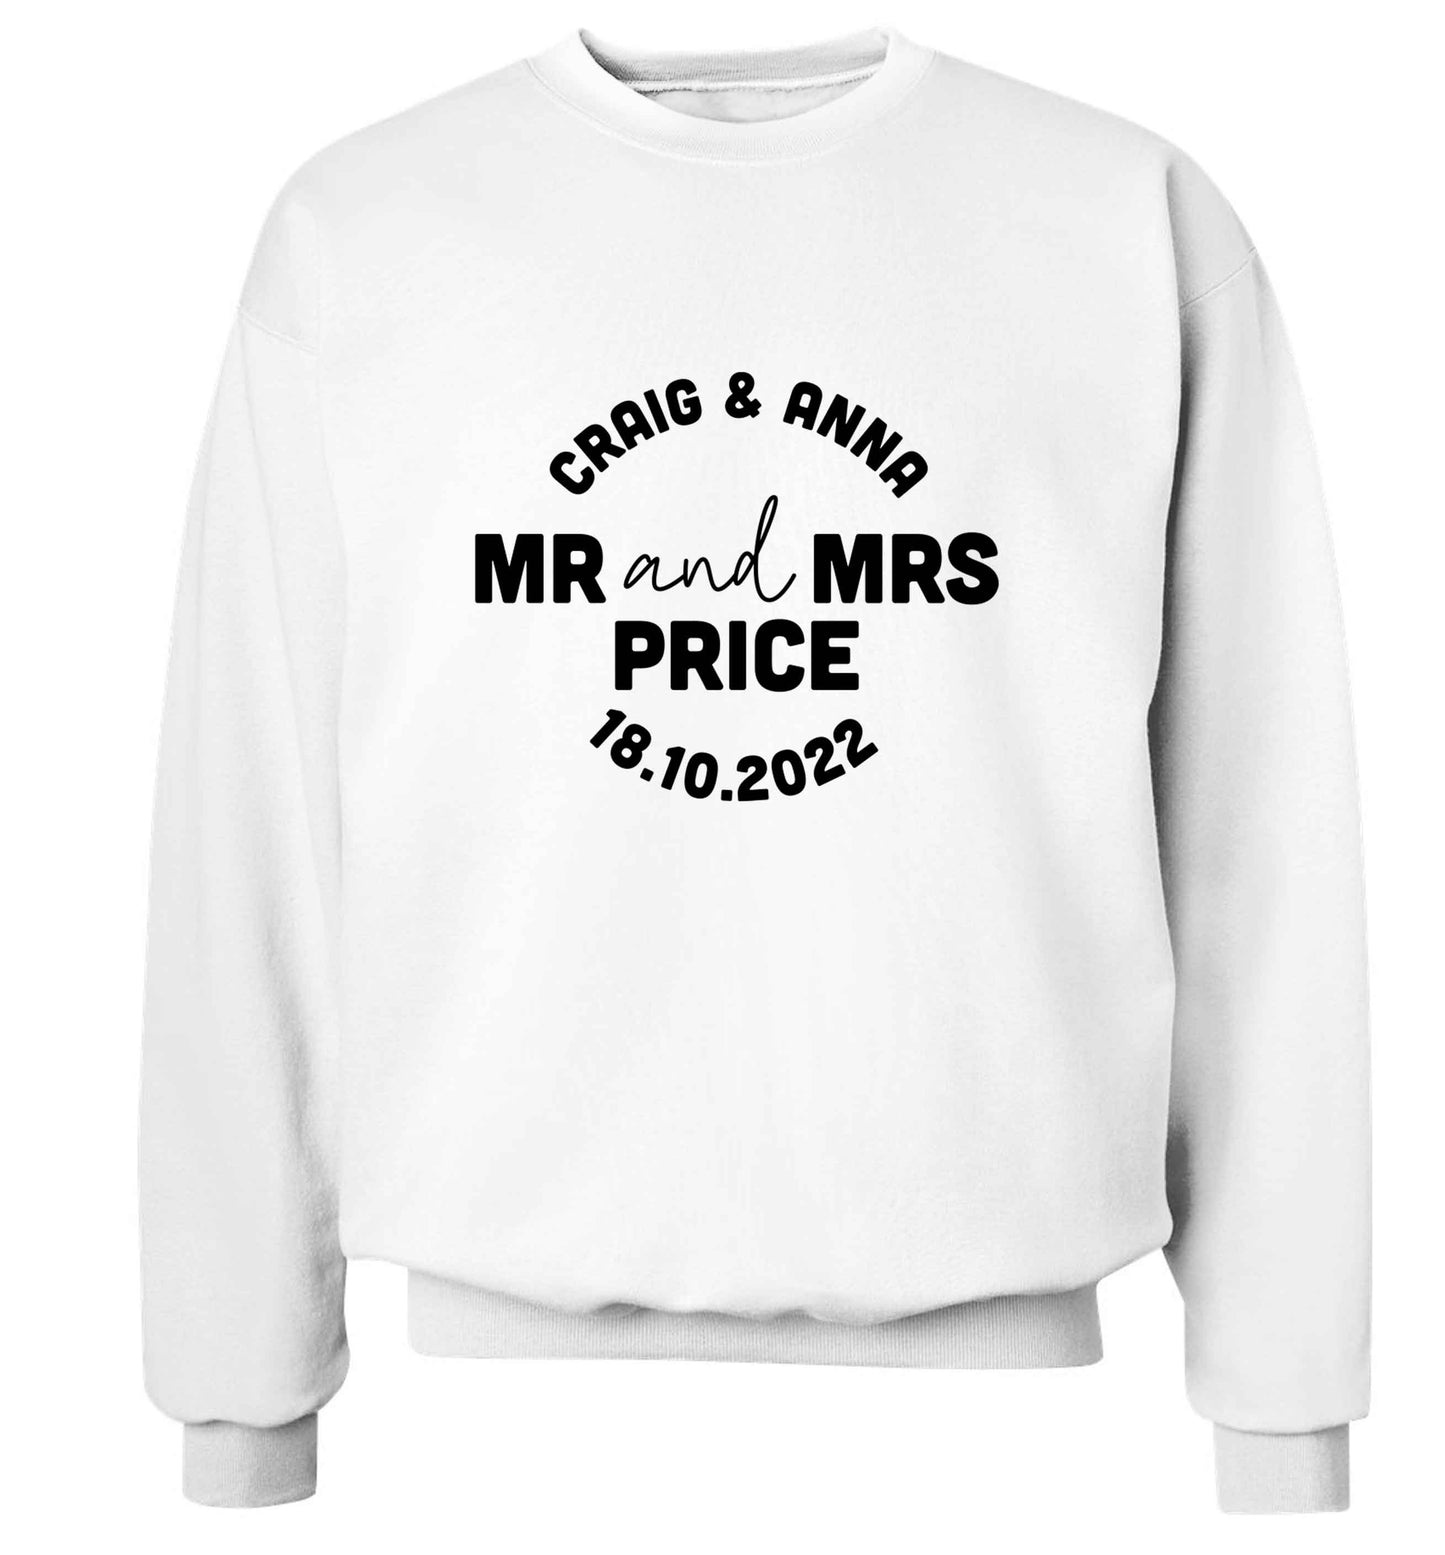 Personalised Mr and Mrs wedding and date! Ideal wedding favours! adult's unisex white sweater 2XL